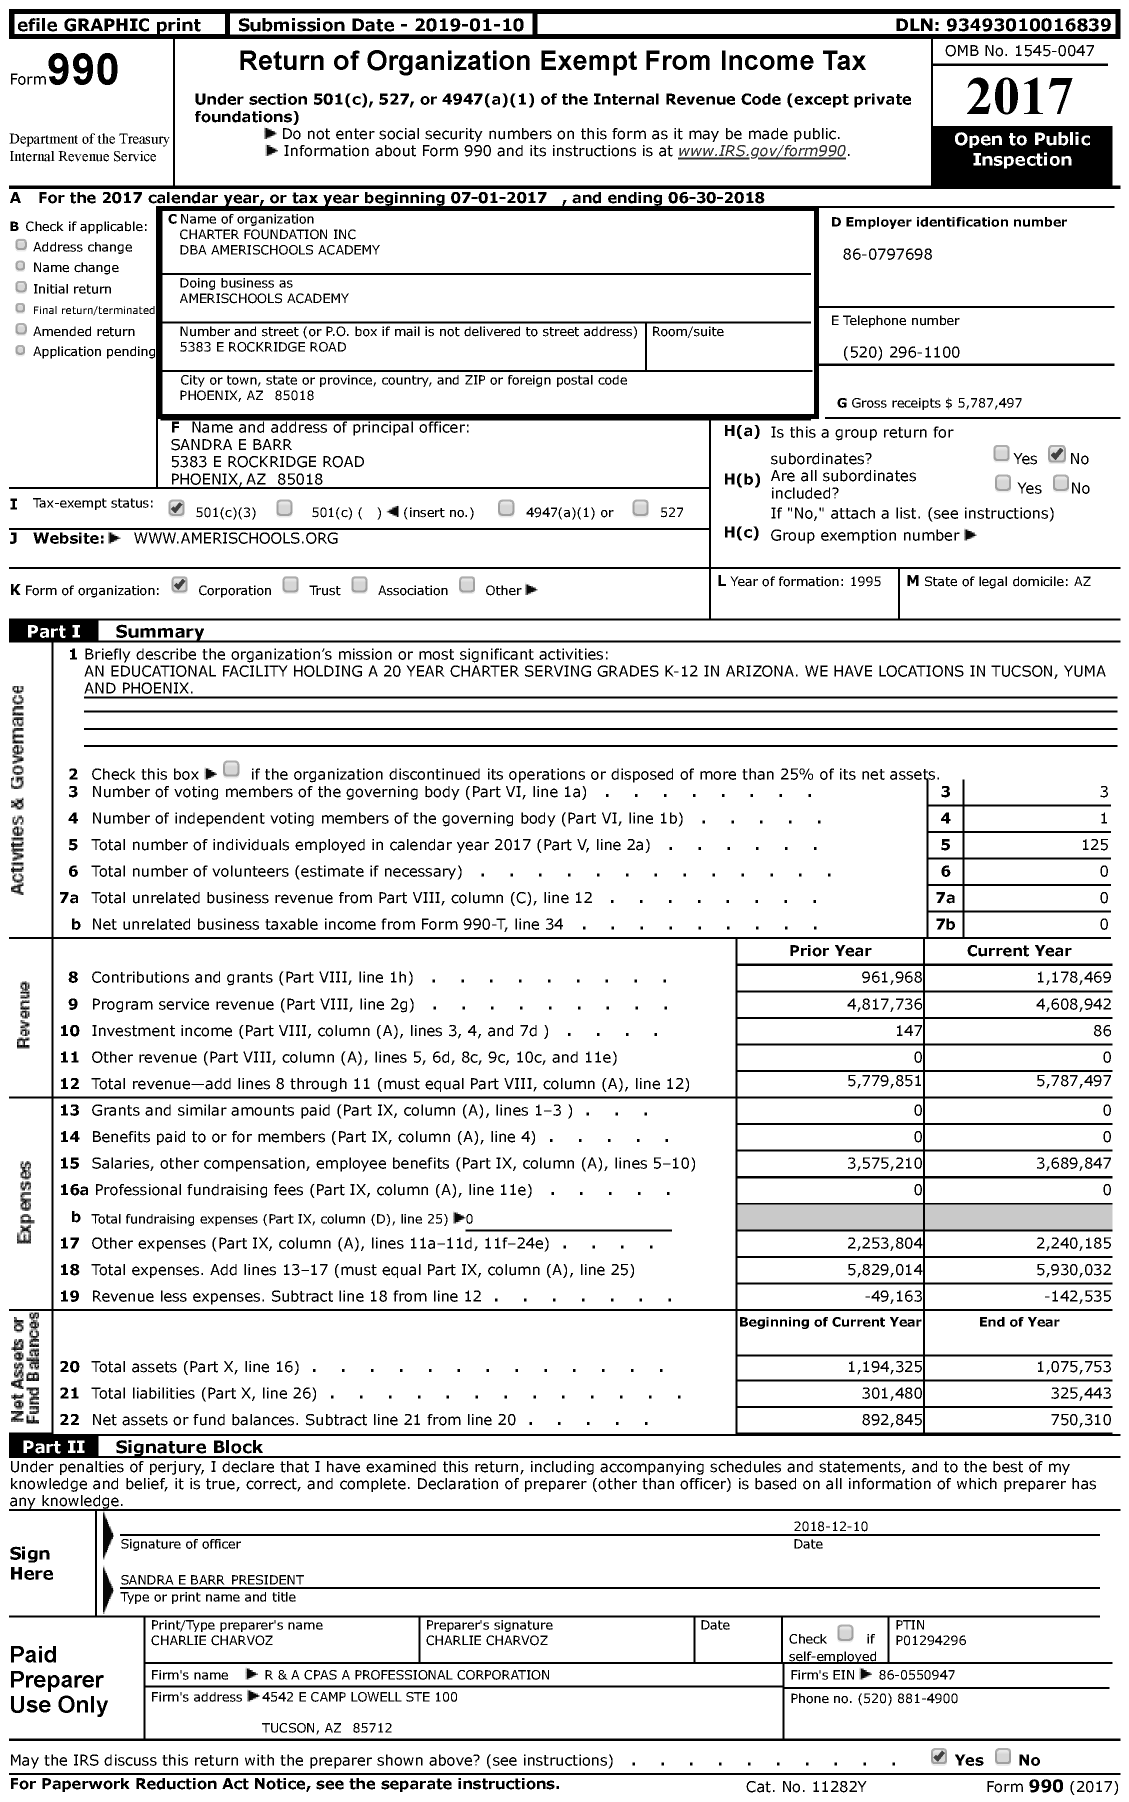 Image of first page of 2017 Form 990 for Charter Foundation / Amerischool Academy